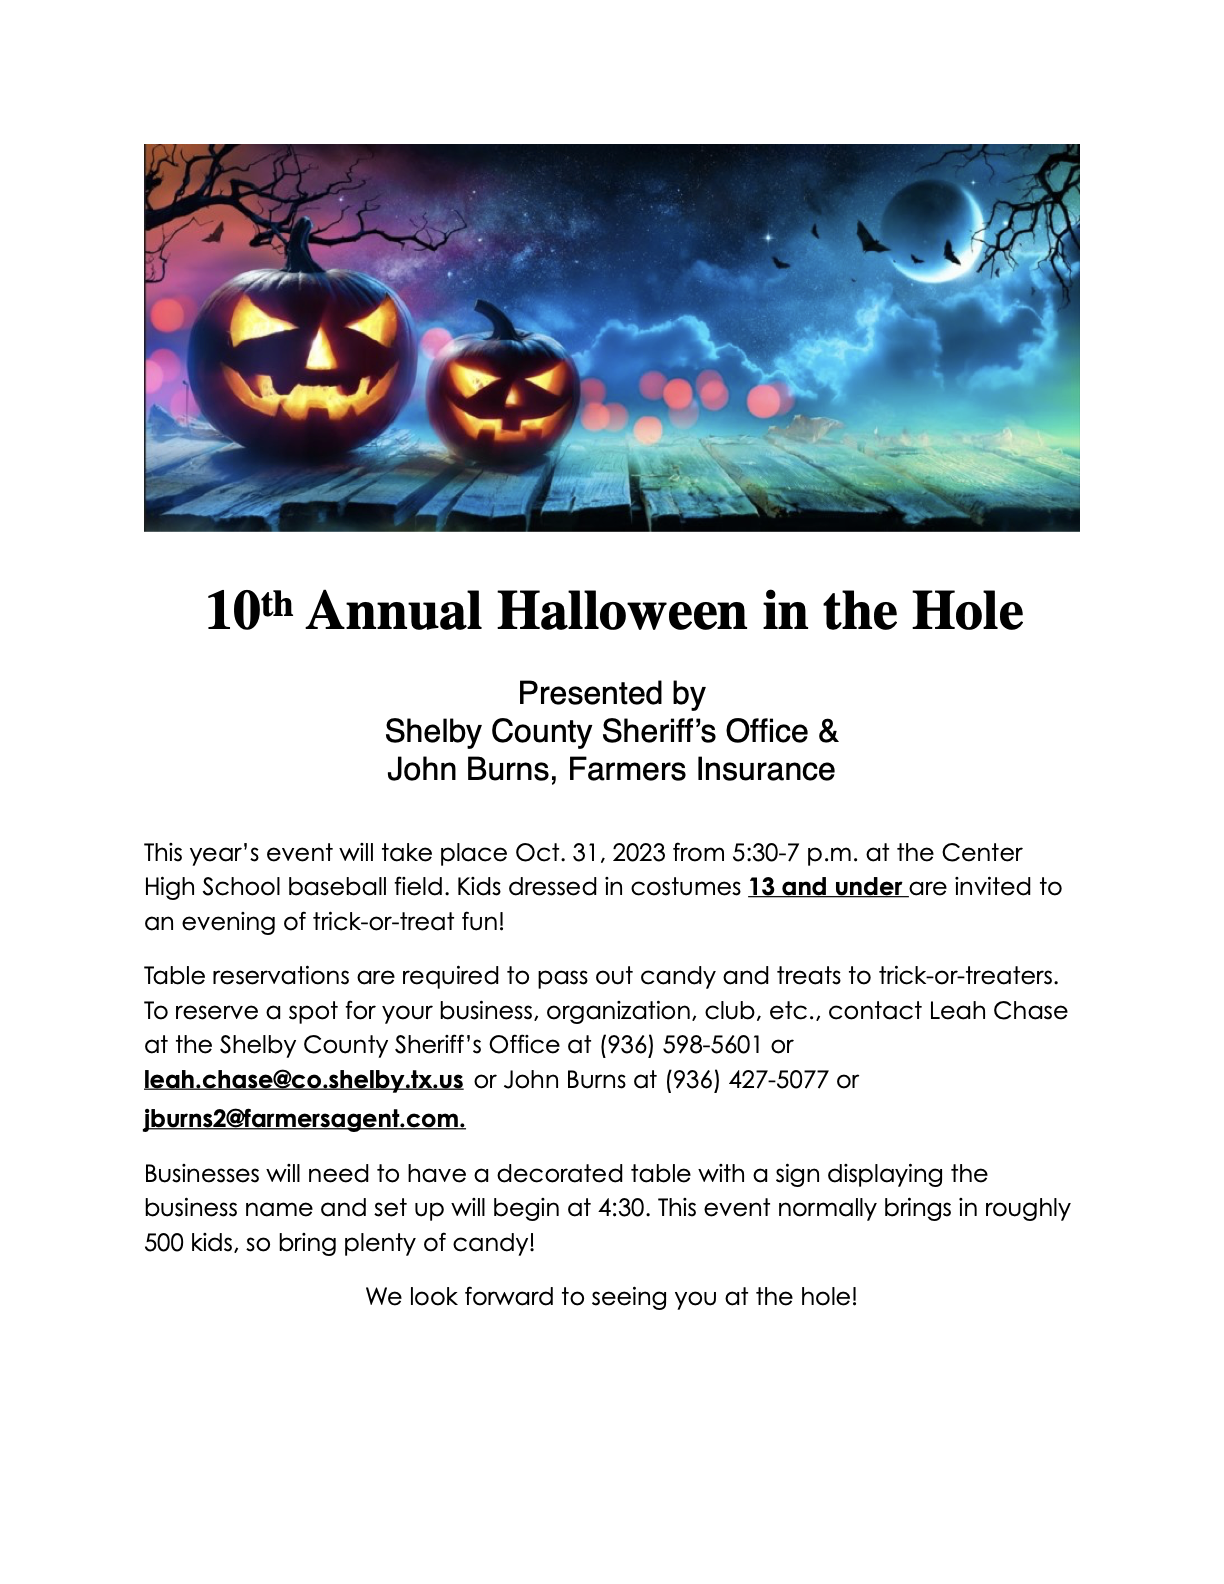 10th Annual Halloween in the Hole 